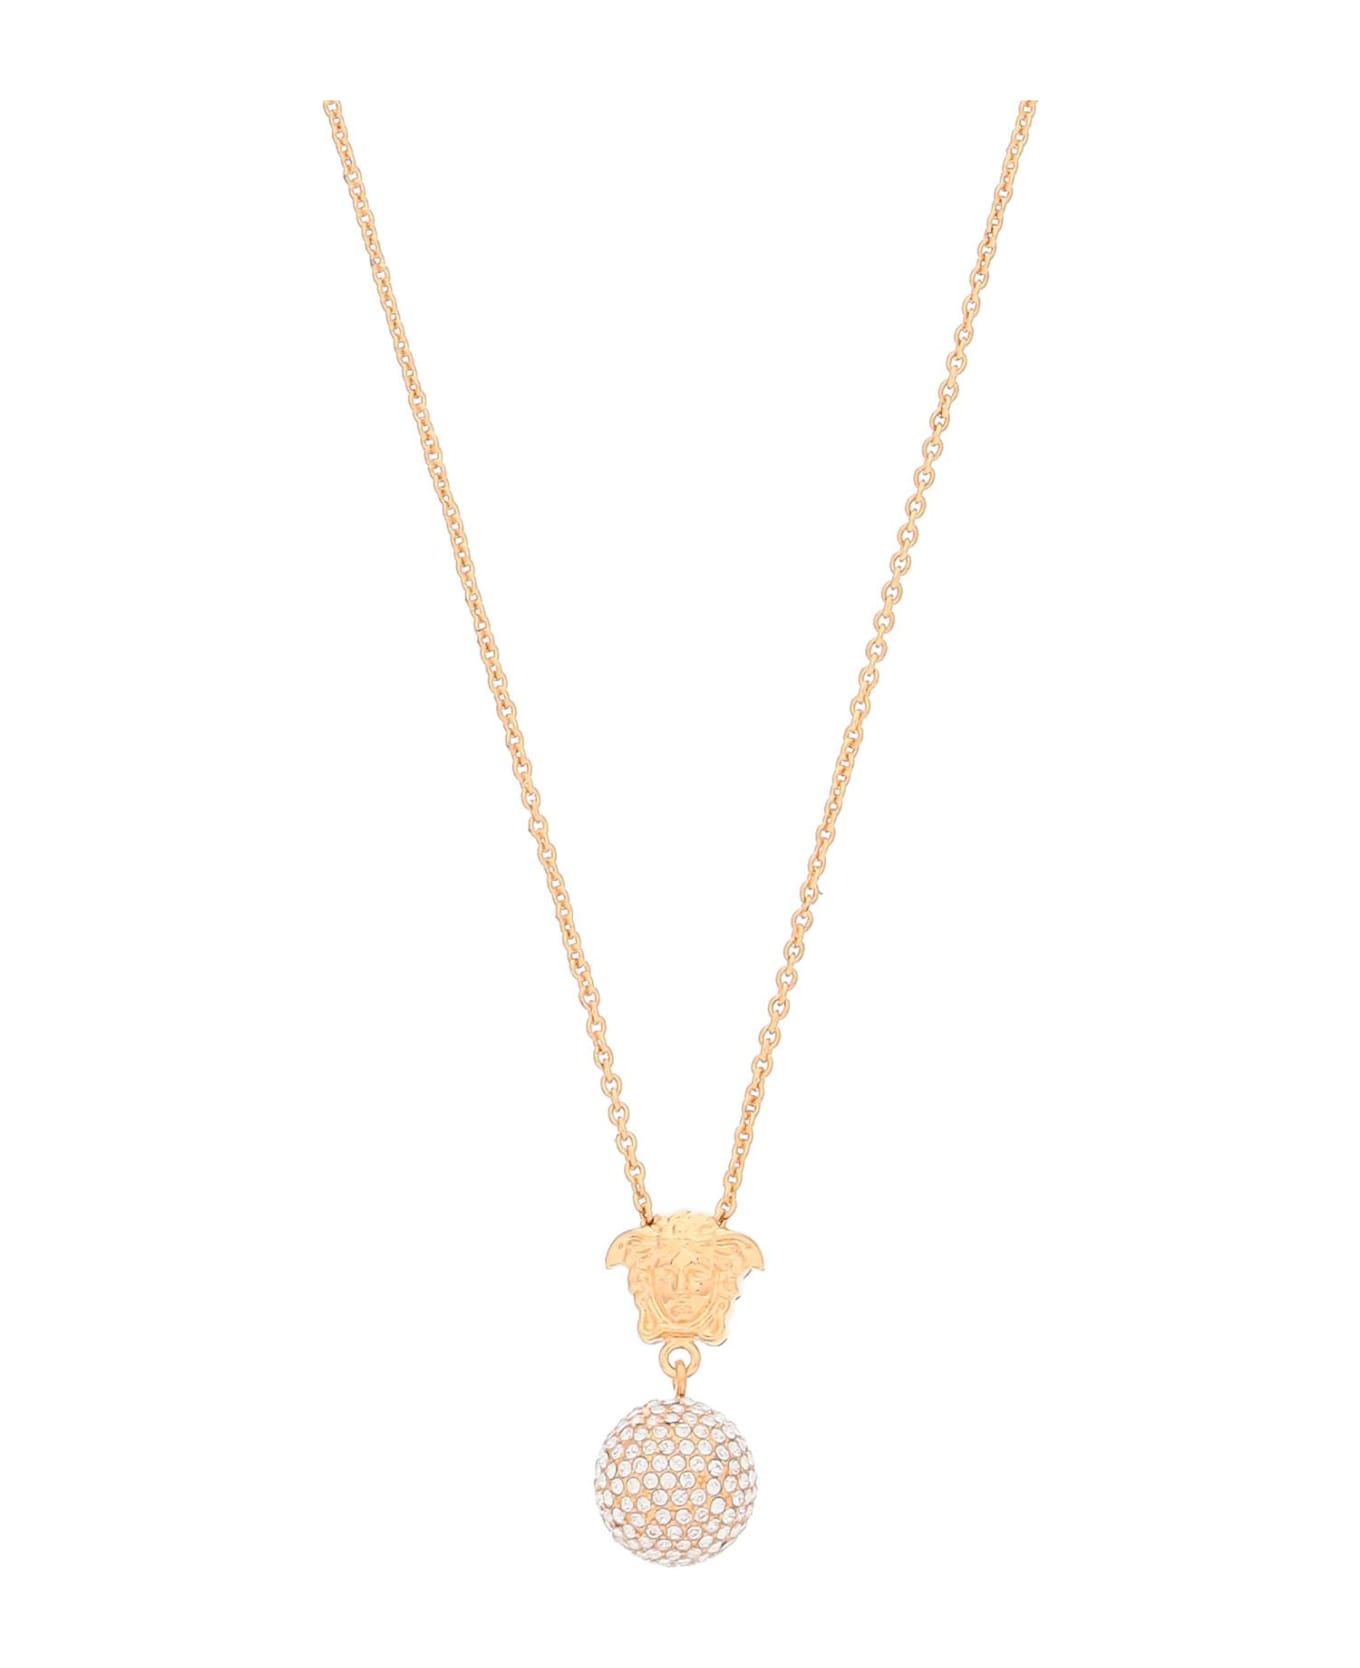 Versace Medusa Crystals Sphere Necklace - Gold Crystall